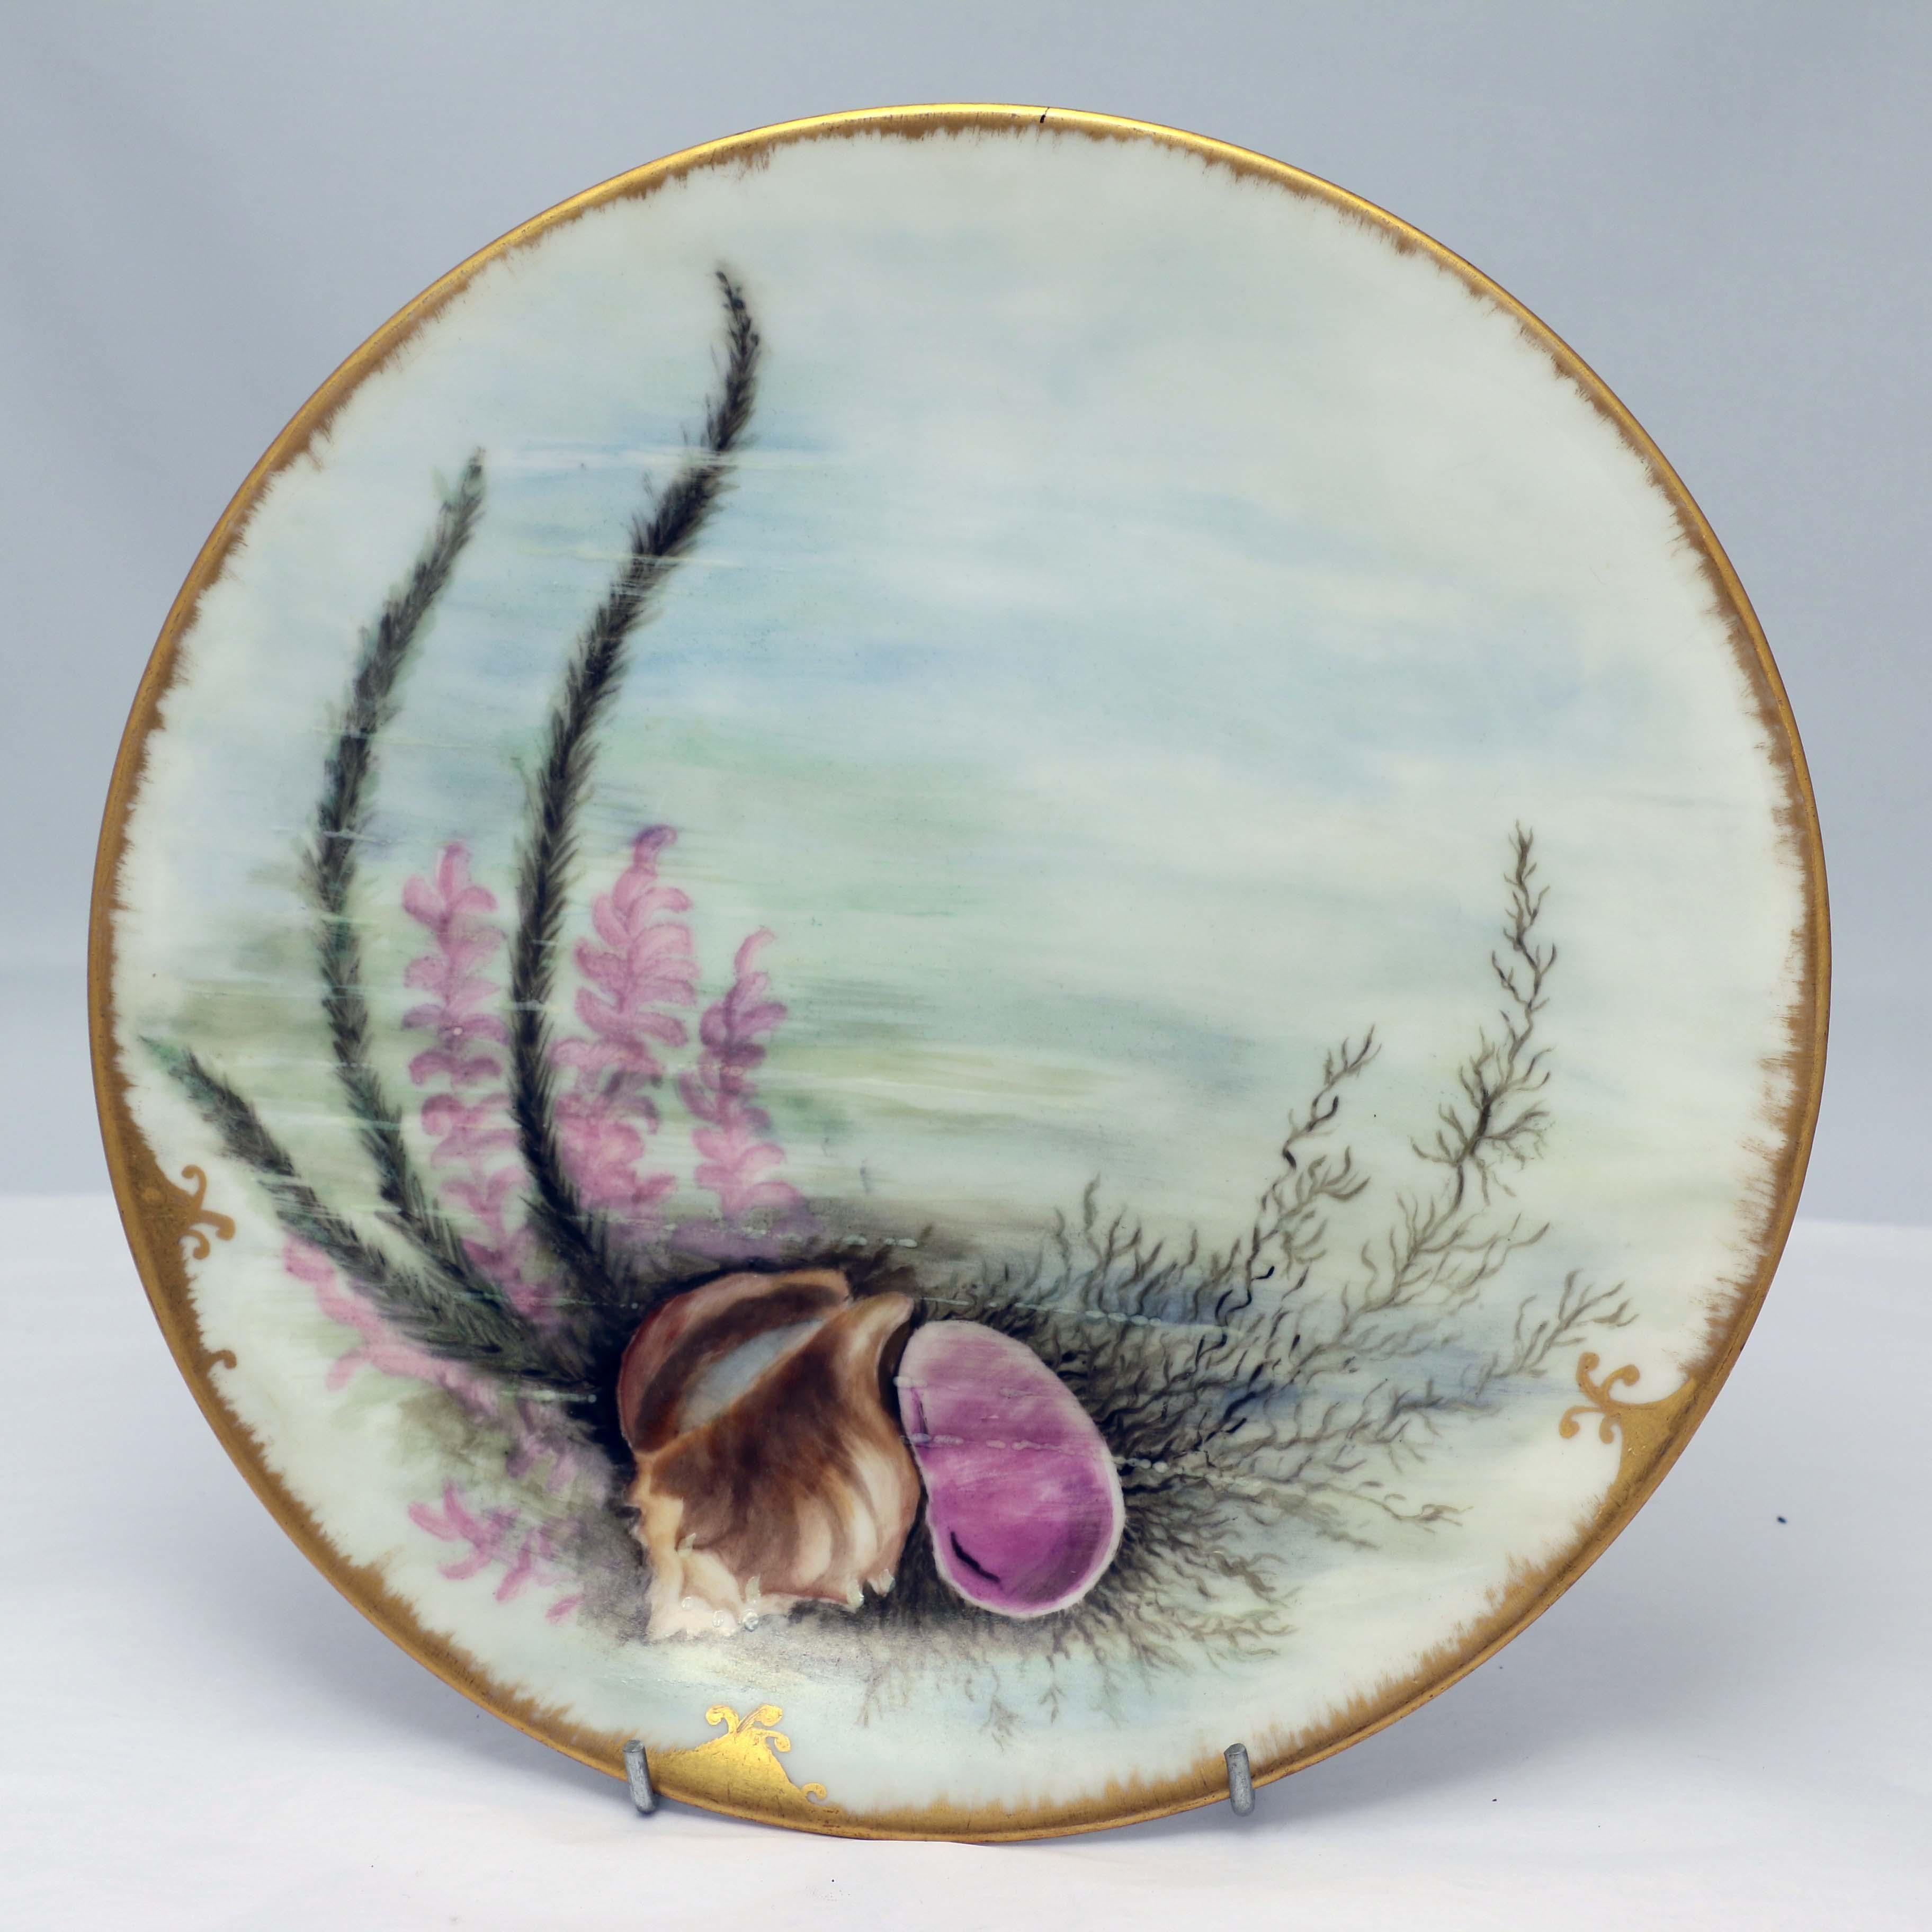 This hard-to-find set for 12 is beautifully painted, by the same hand, (8 are signed with initials). They all depict shells and aquatic plants and grasses on the ocean floor. As one would expect, they are painted in the pastel palette favored by